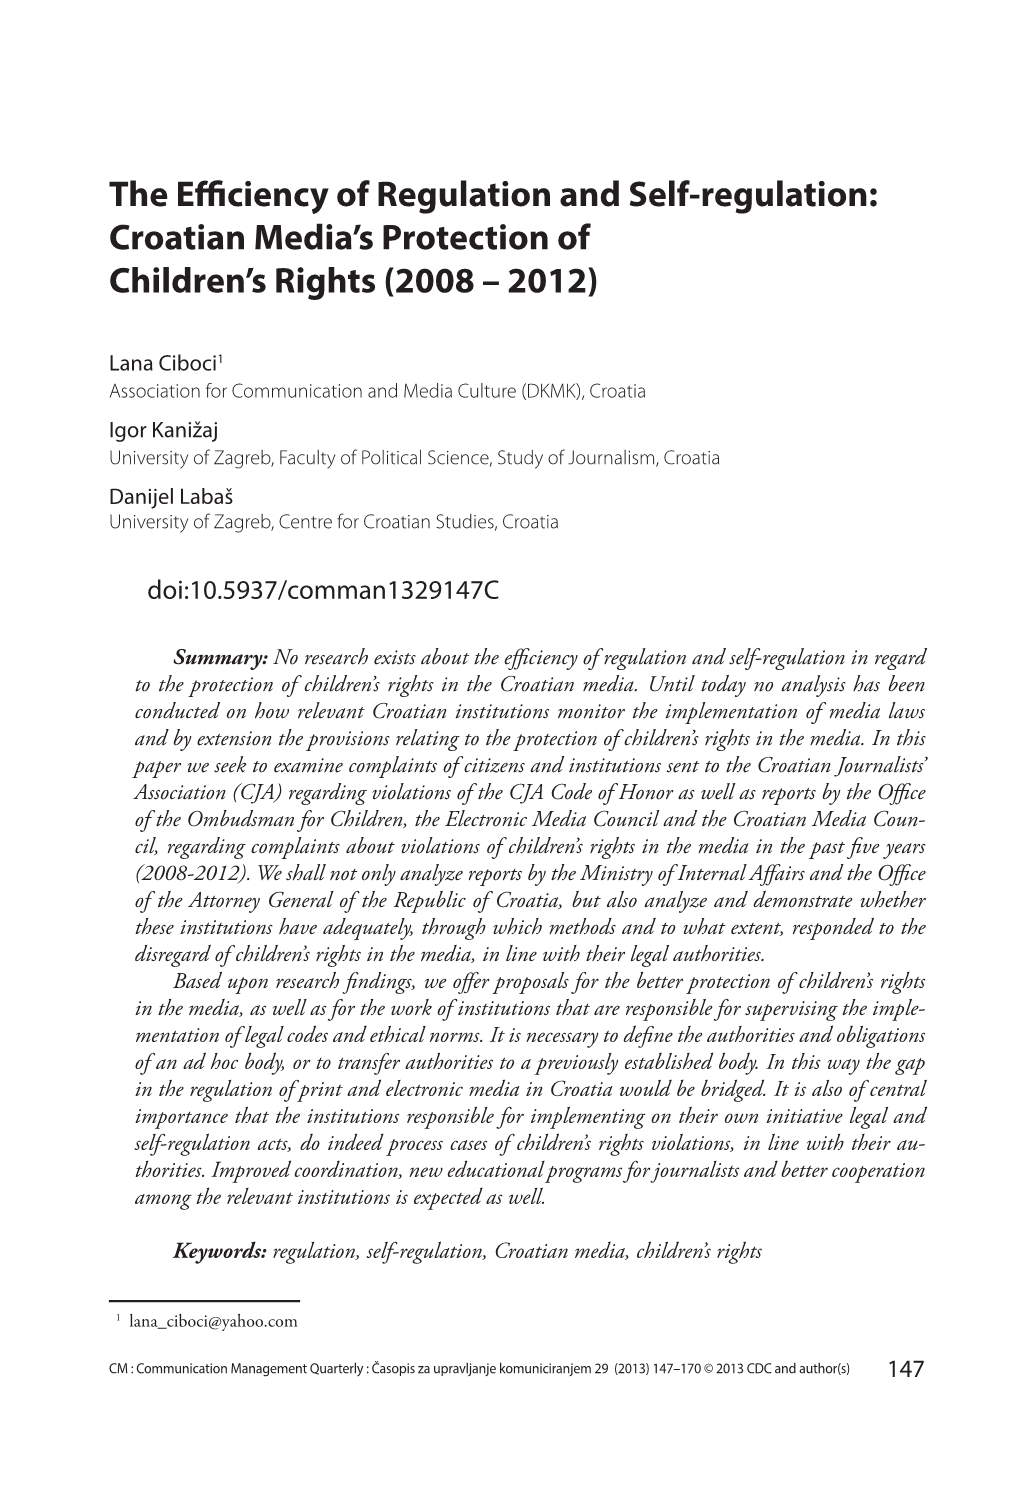 The Efficiency of Regulation and Self-Regulation: Croatian Media's Protection of Children's Rights (2008 – 2012)